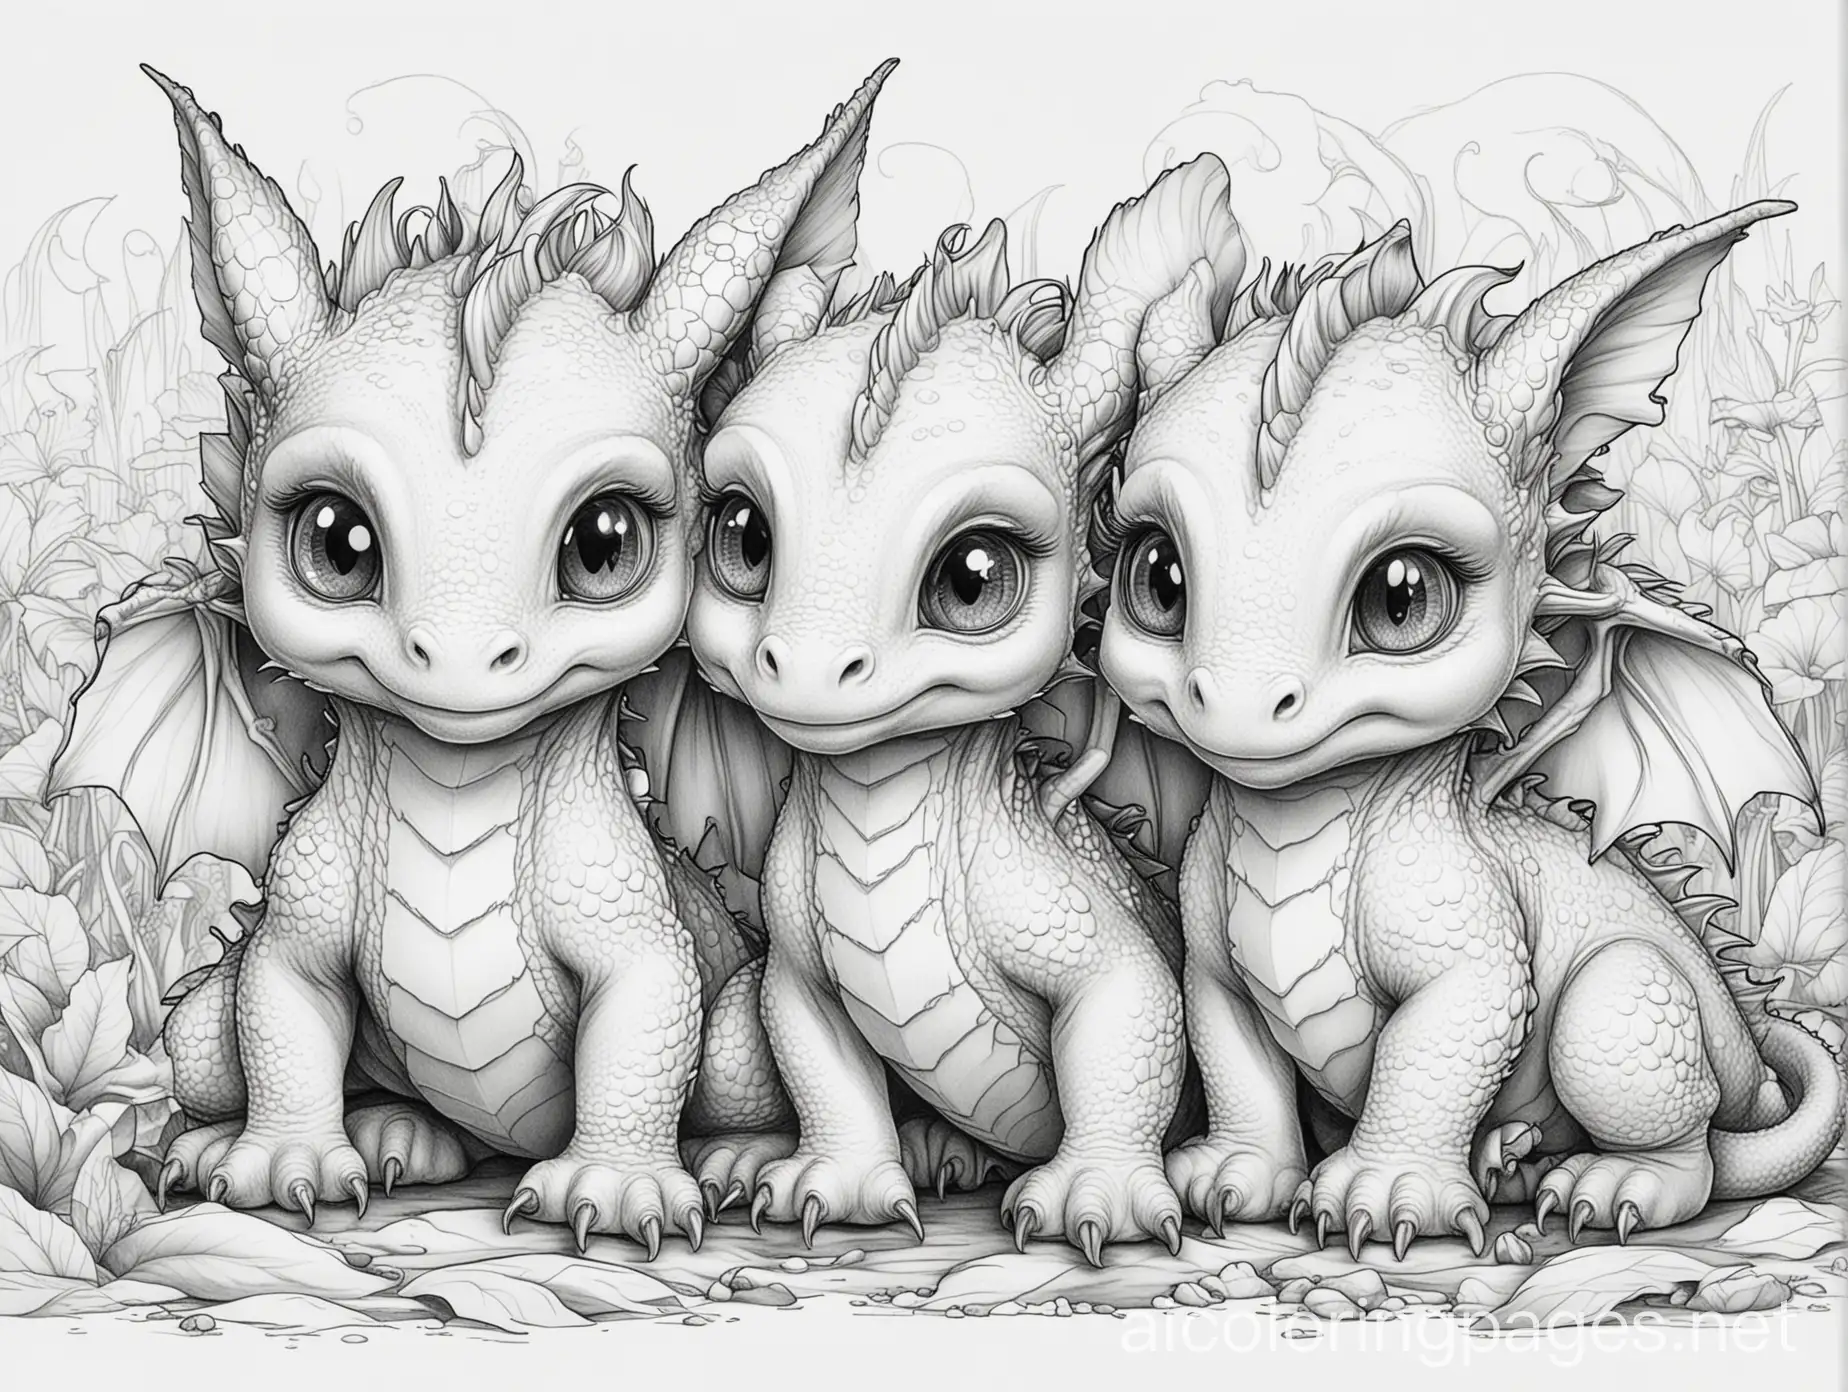 Detailed-Line-Art-of-Cute-Baby-Dragons-for-Coloring-Page